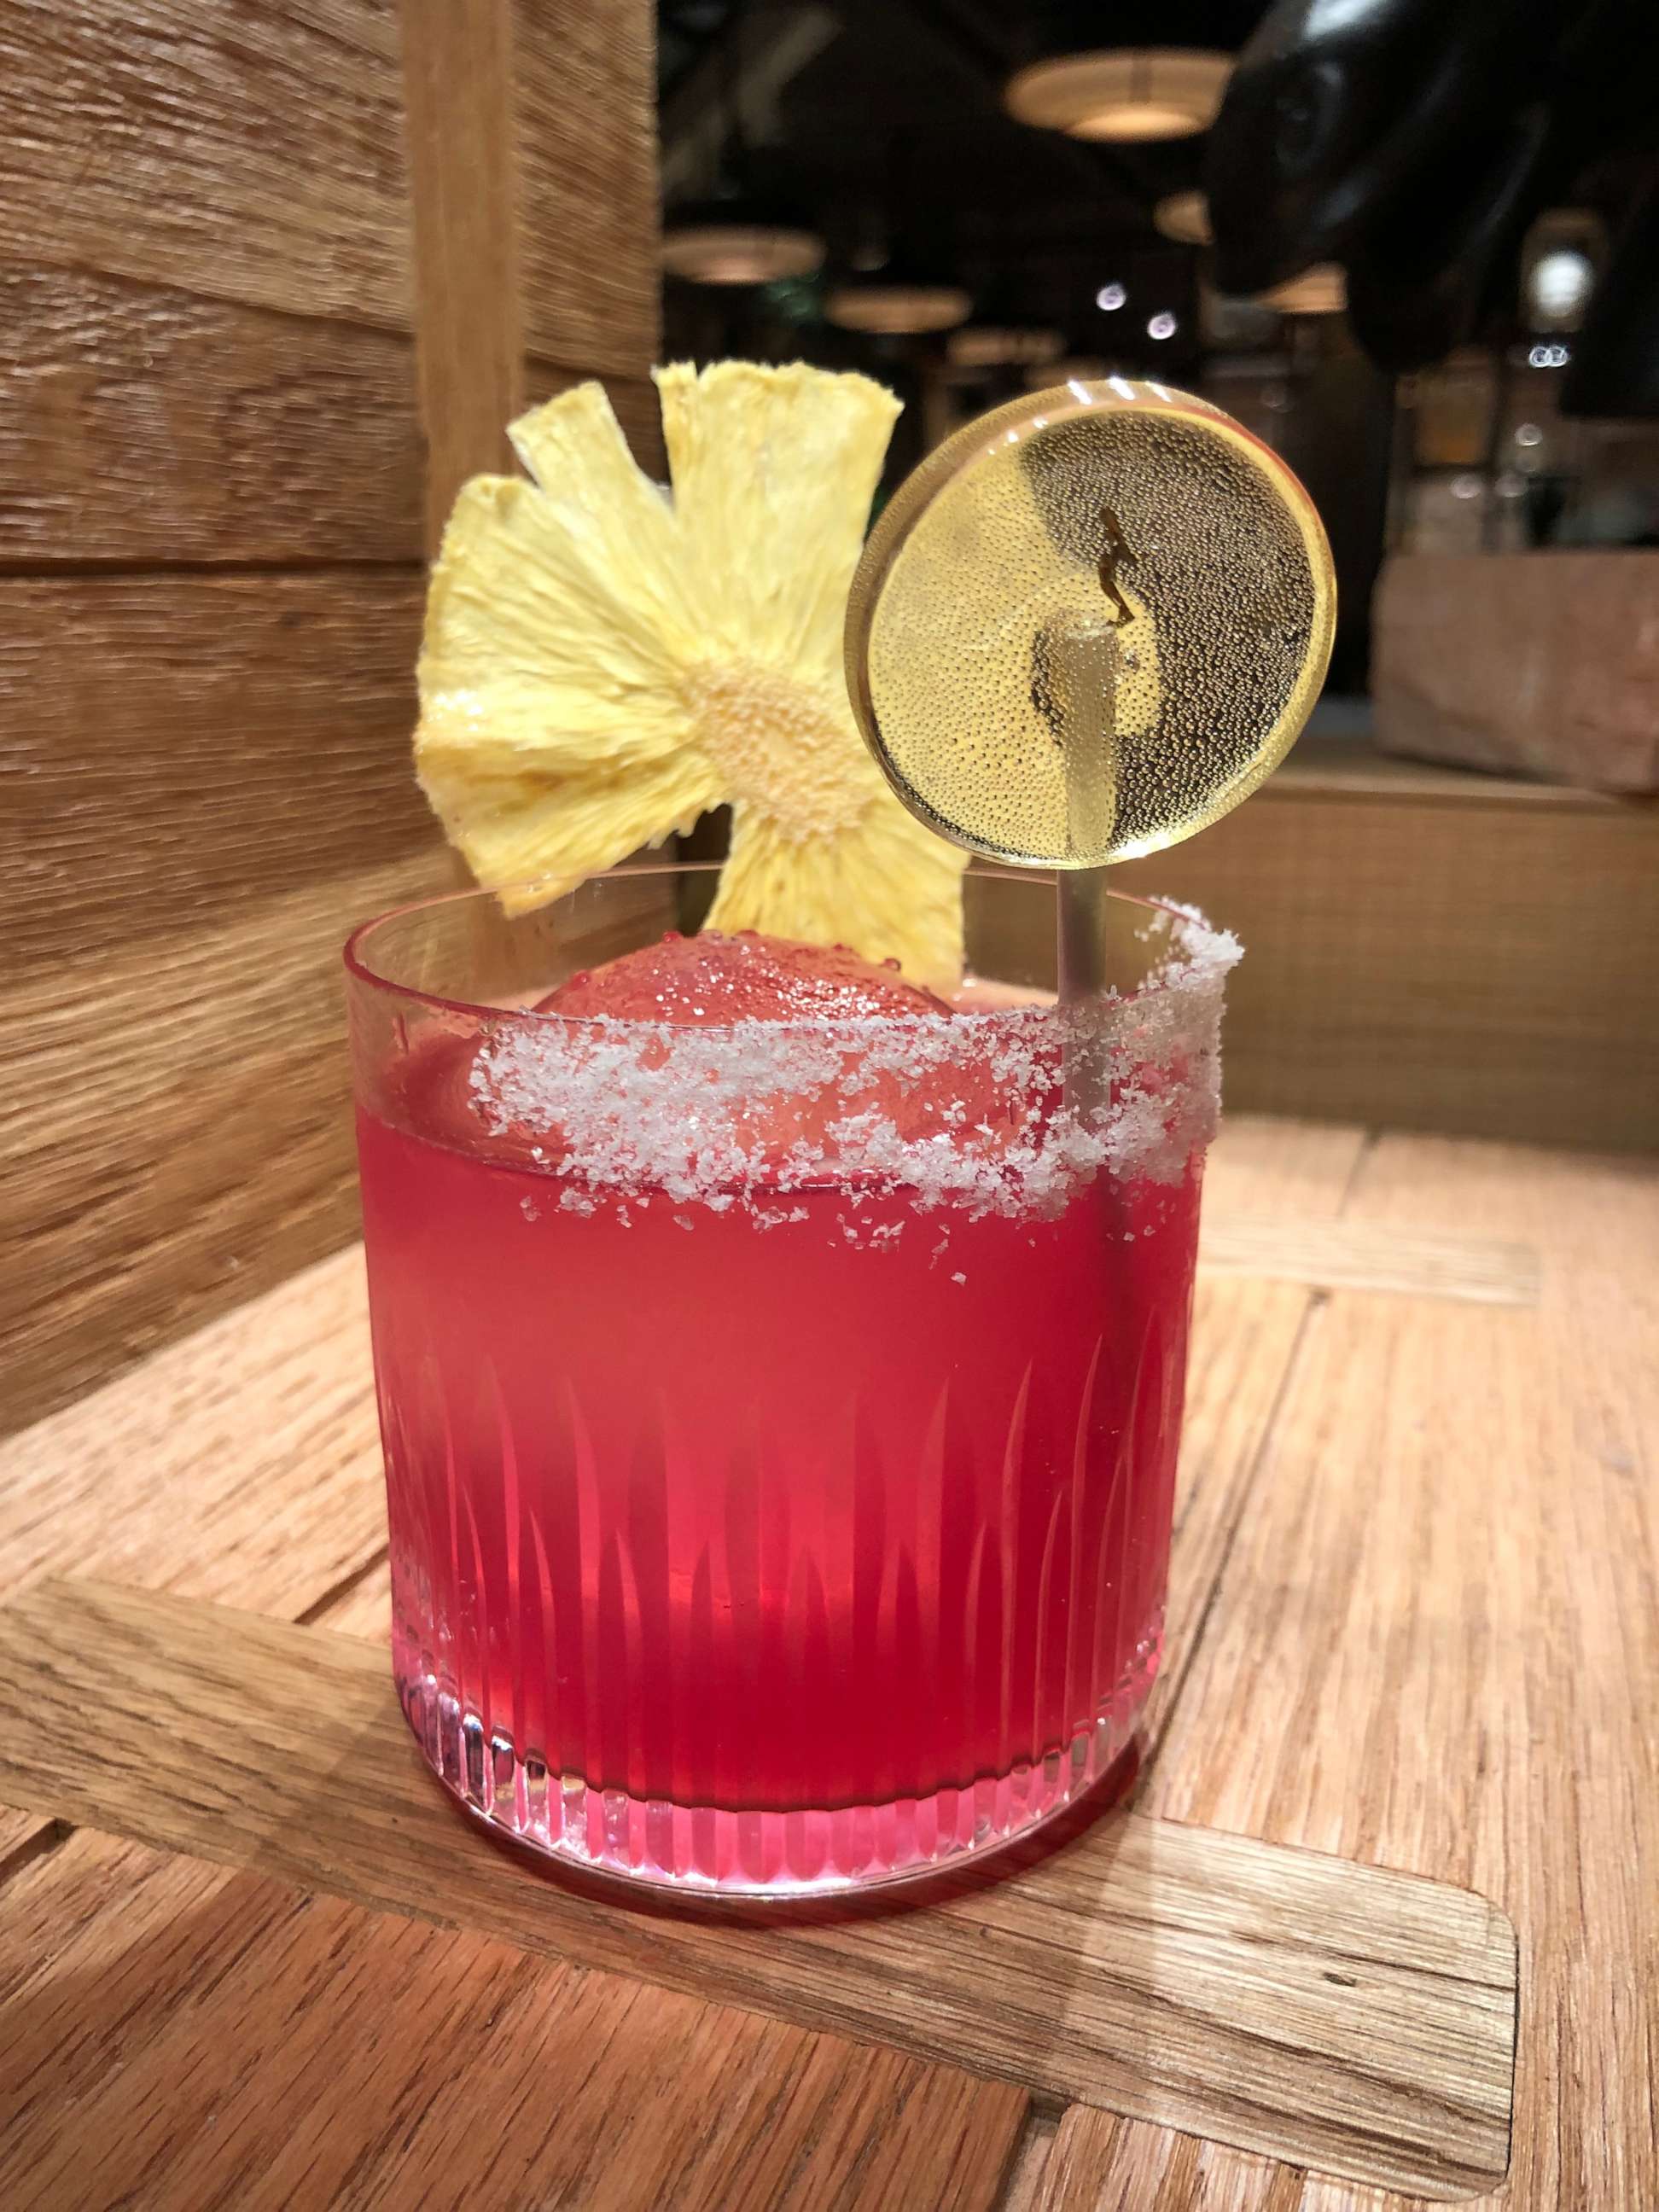 M&S' Giant Cocktail Ice Balls Are BACK For Summer 2023